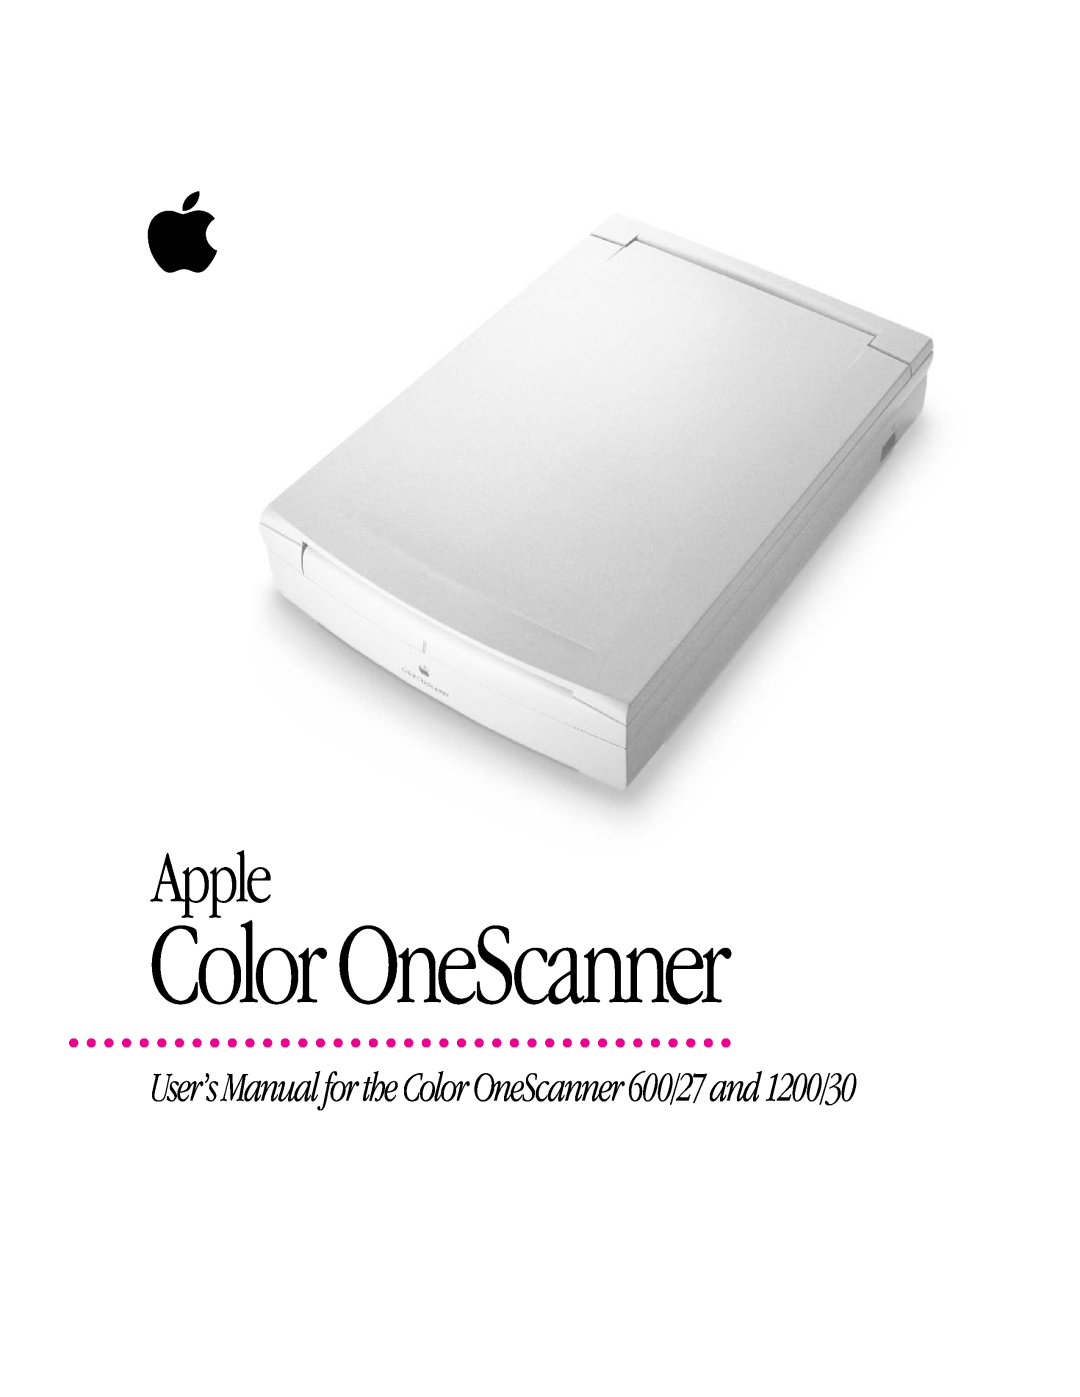 Apple 1230, 627 user manual Apple, User’s Manual for the Color OneScanner 600/27 and 1200/30 